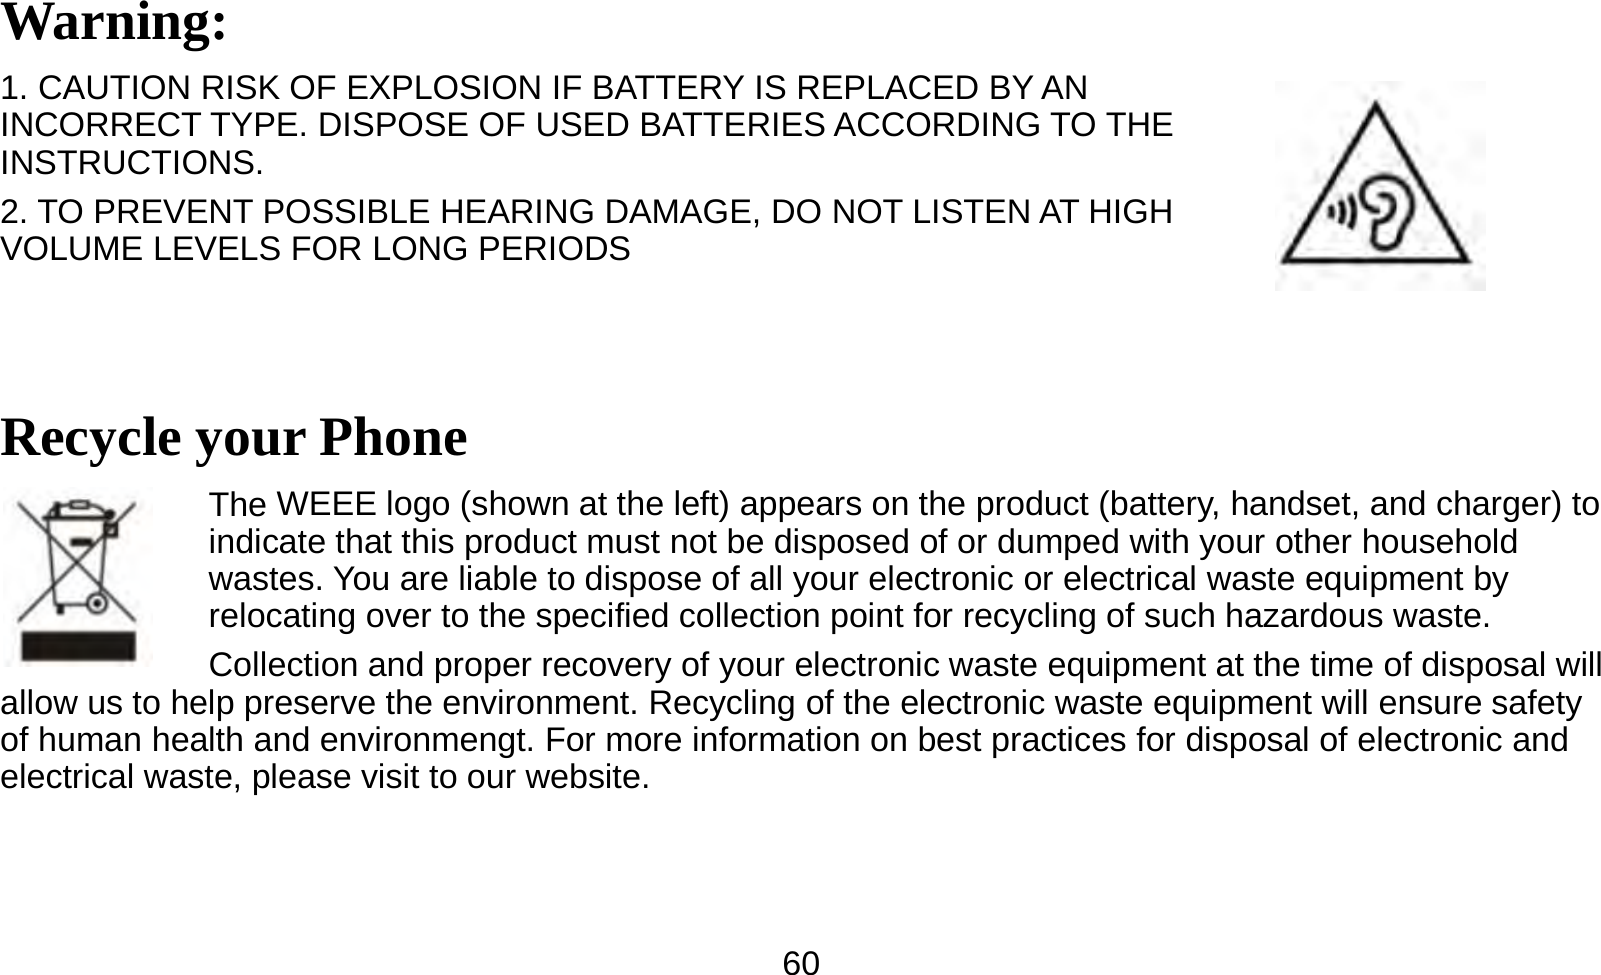   60Warning: 1. CAUTION RISK OF EXPLOSION IF BATTERY IS REPLACED BY AN INCORRECT TYPE. DISPOSE OF USED BATTERIES ACCORDING TO THE INSTRUCTIONS. 2. TO PREVENT POSSIBLE HEARING DAMAGE, DO NOT LISTEN AT HIGH VOLUME LEVELS FOR LONG PERIODS  Recycle your Phone The WEEE logo (shown at the left) appears on the product (battery, handset, and charger) to indicate that this product must not be disposed of or dumped with your other household wastes. You are liable to dispose of all your electronic or electrical waste equipment by relocating over to the specified collection point for recycling of such hazardous waste. Collection and proper recovery of your electronic waste equipment at the time of disposal will allow us to help preserve the environment. Recycling of the electronic waste equipment will ensure safety of human health and environmengt. For more information on best practices for disposal of electronic and electrical waste, please visit to our website. 